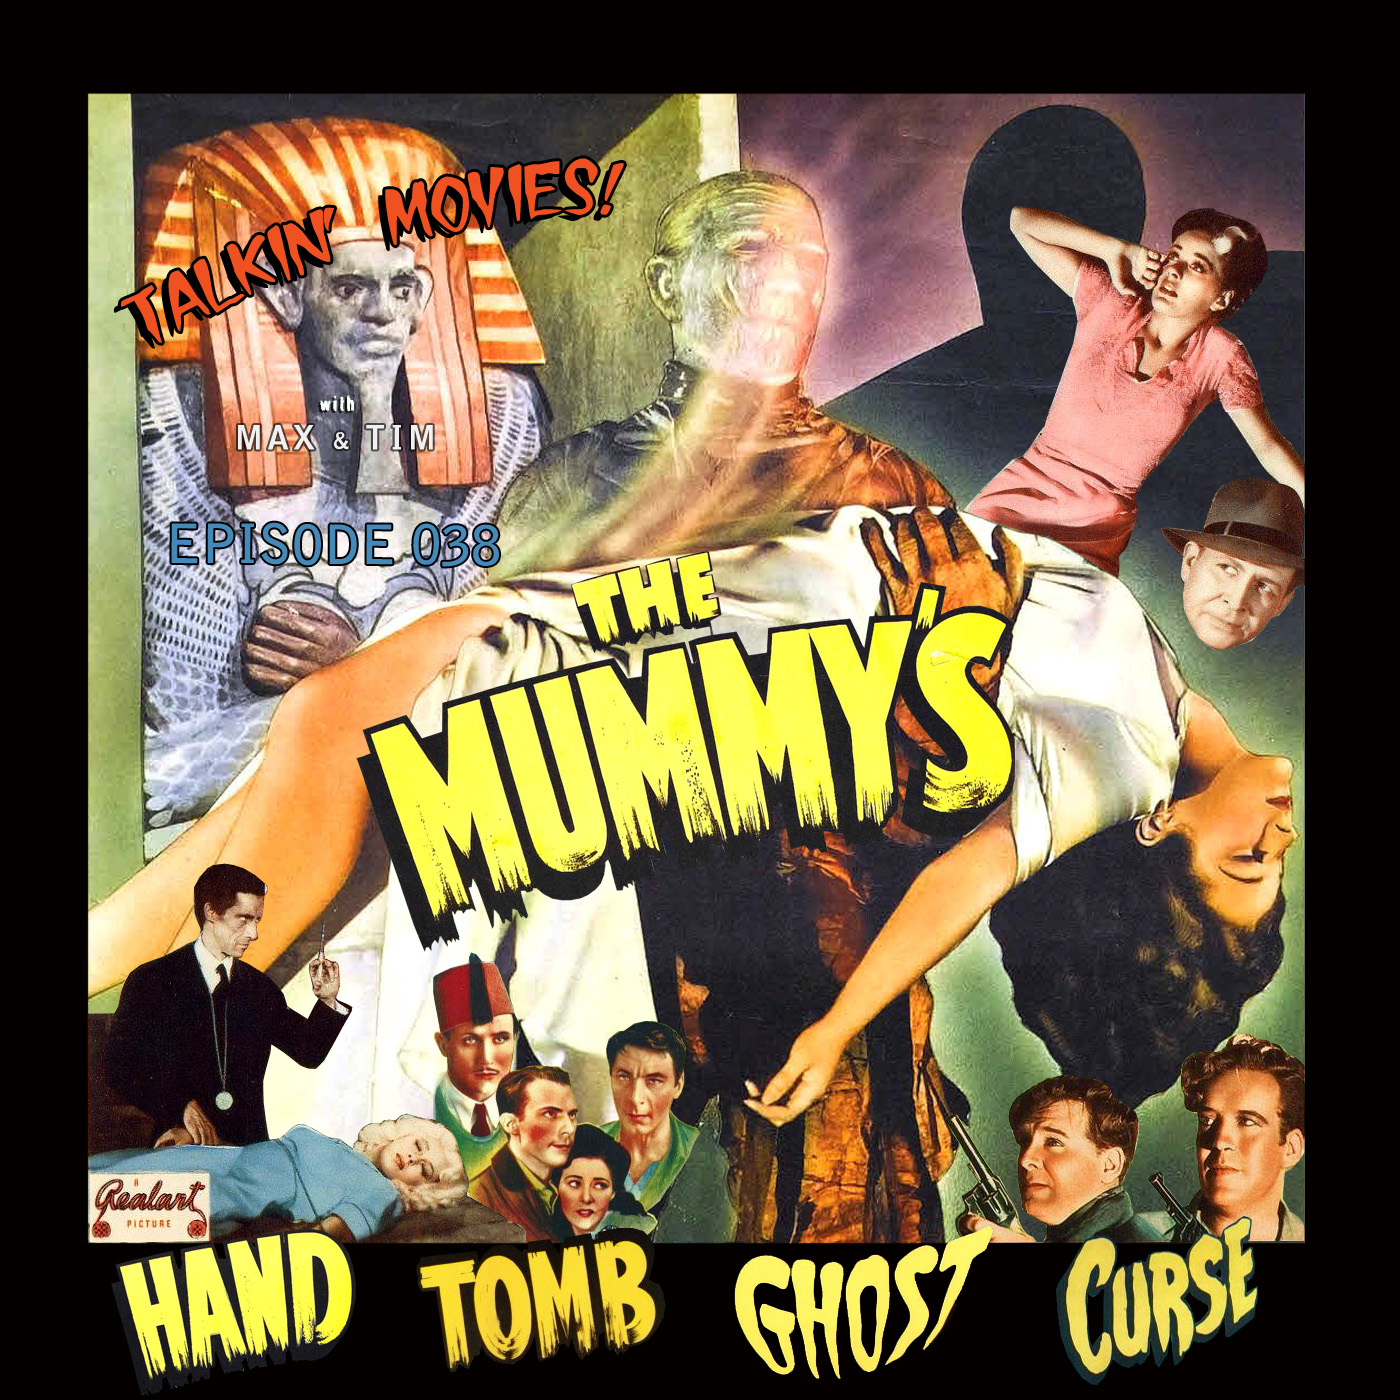 038 - Mummy Sequels: The Hand, Tomb, Ghost, and Curse of Kharis